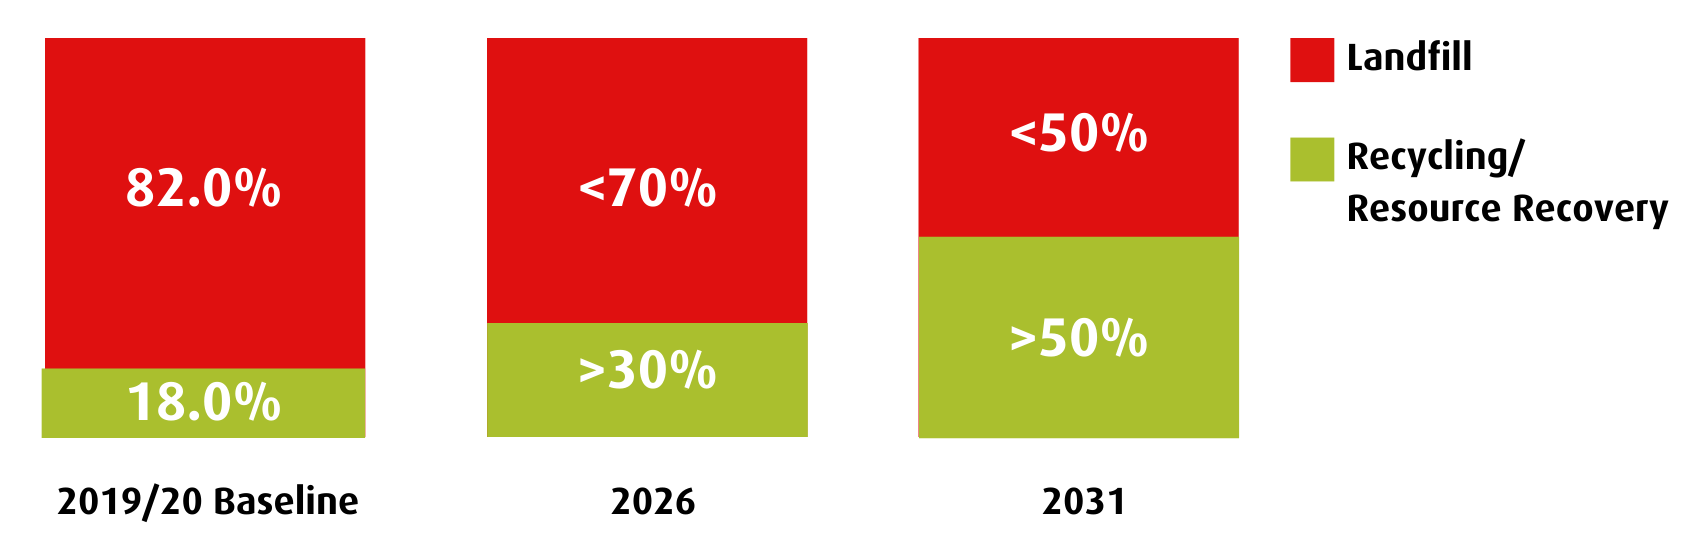 2019/2020 baseline data shows household waste comprises  82% general waste and 18% recyclable materials. Through this strategy it is anticipated that diversion will increase to 30% of waste being placed in the recycle bin by 2026 and up to 50% by 2031